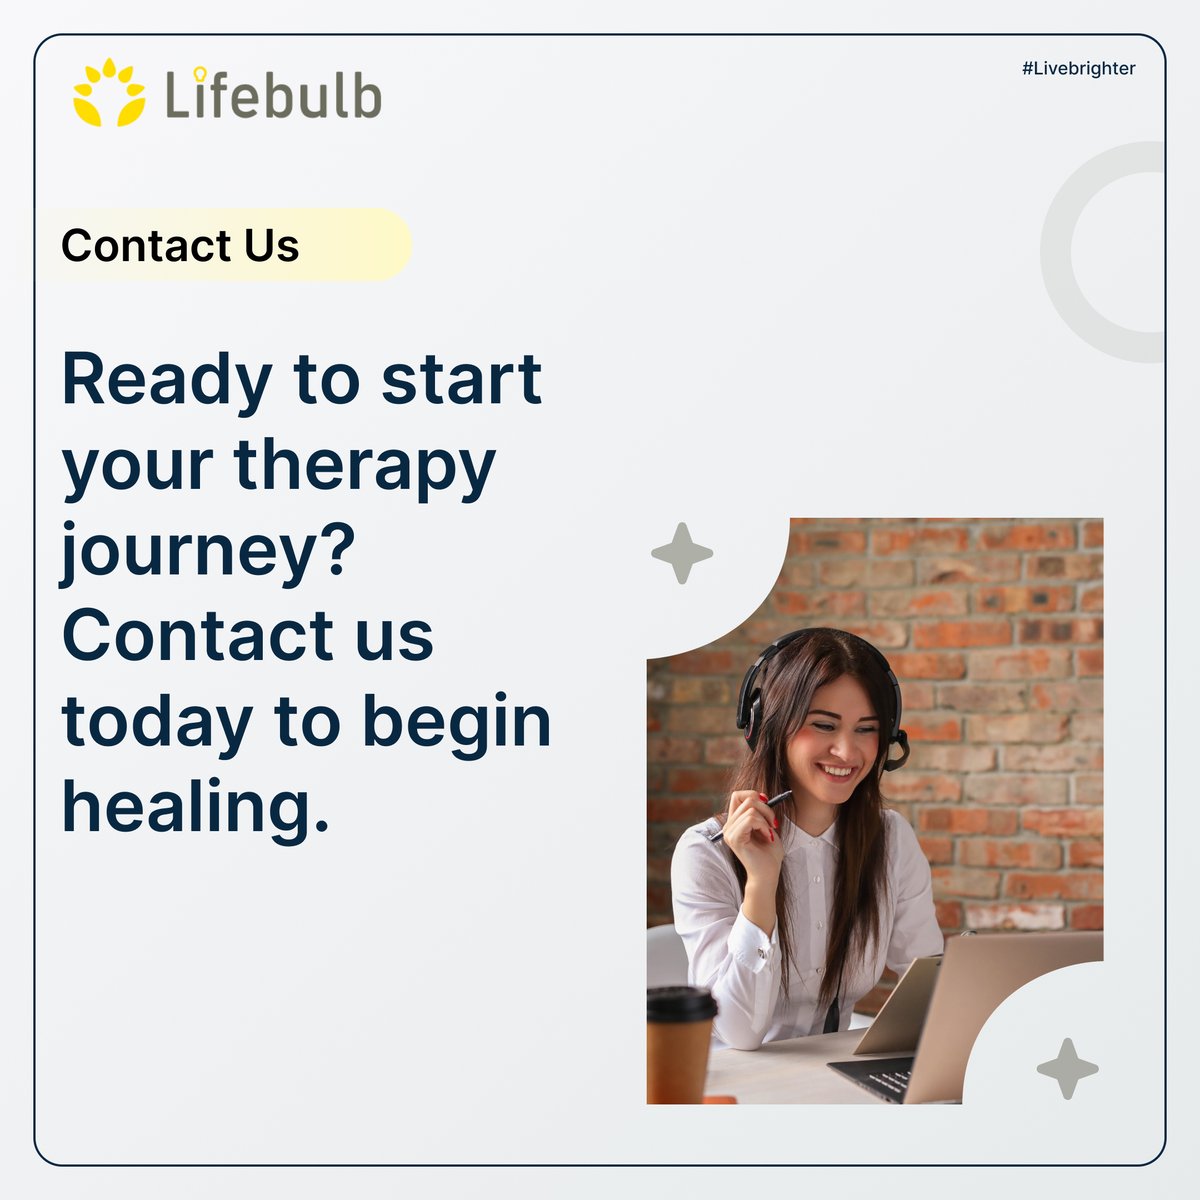 Ready to heal, grow, and thrive? 🌟 Begin your therapy journey with Lifebulb today. Connect with us at lifebulb.com/contact-us to find your perfect therapist or counselor match.

#MentalHealth #HealingJourney #Lifebulb #FindSupport